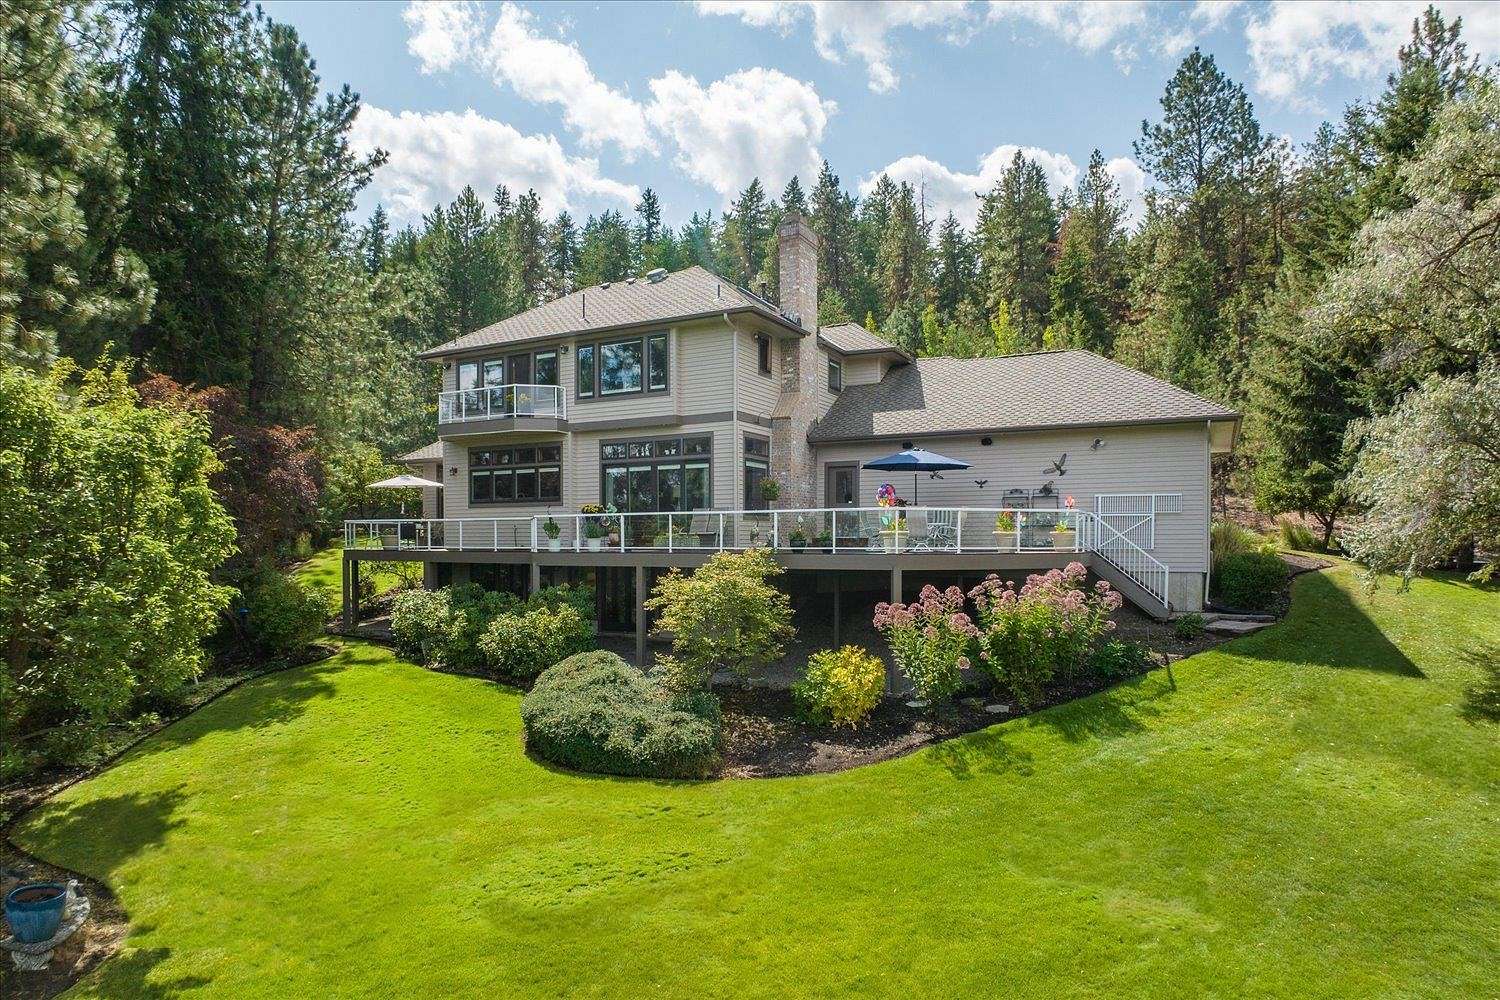 12.8 Acres of Land with Home for Sale in Spokane, Washington